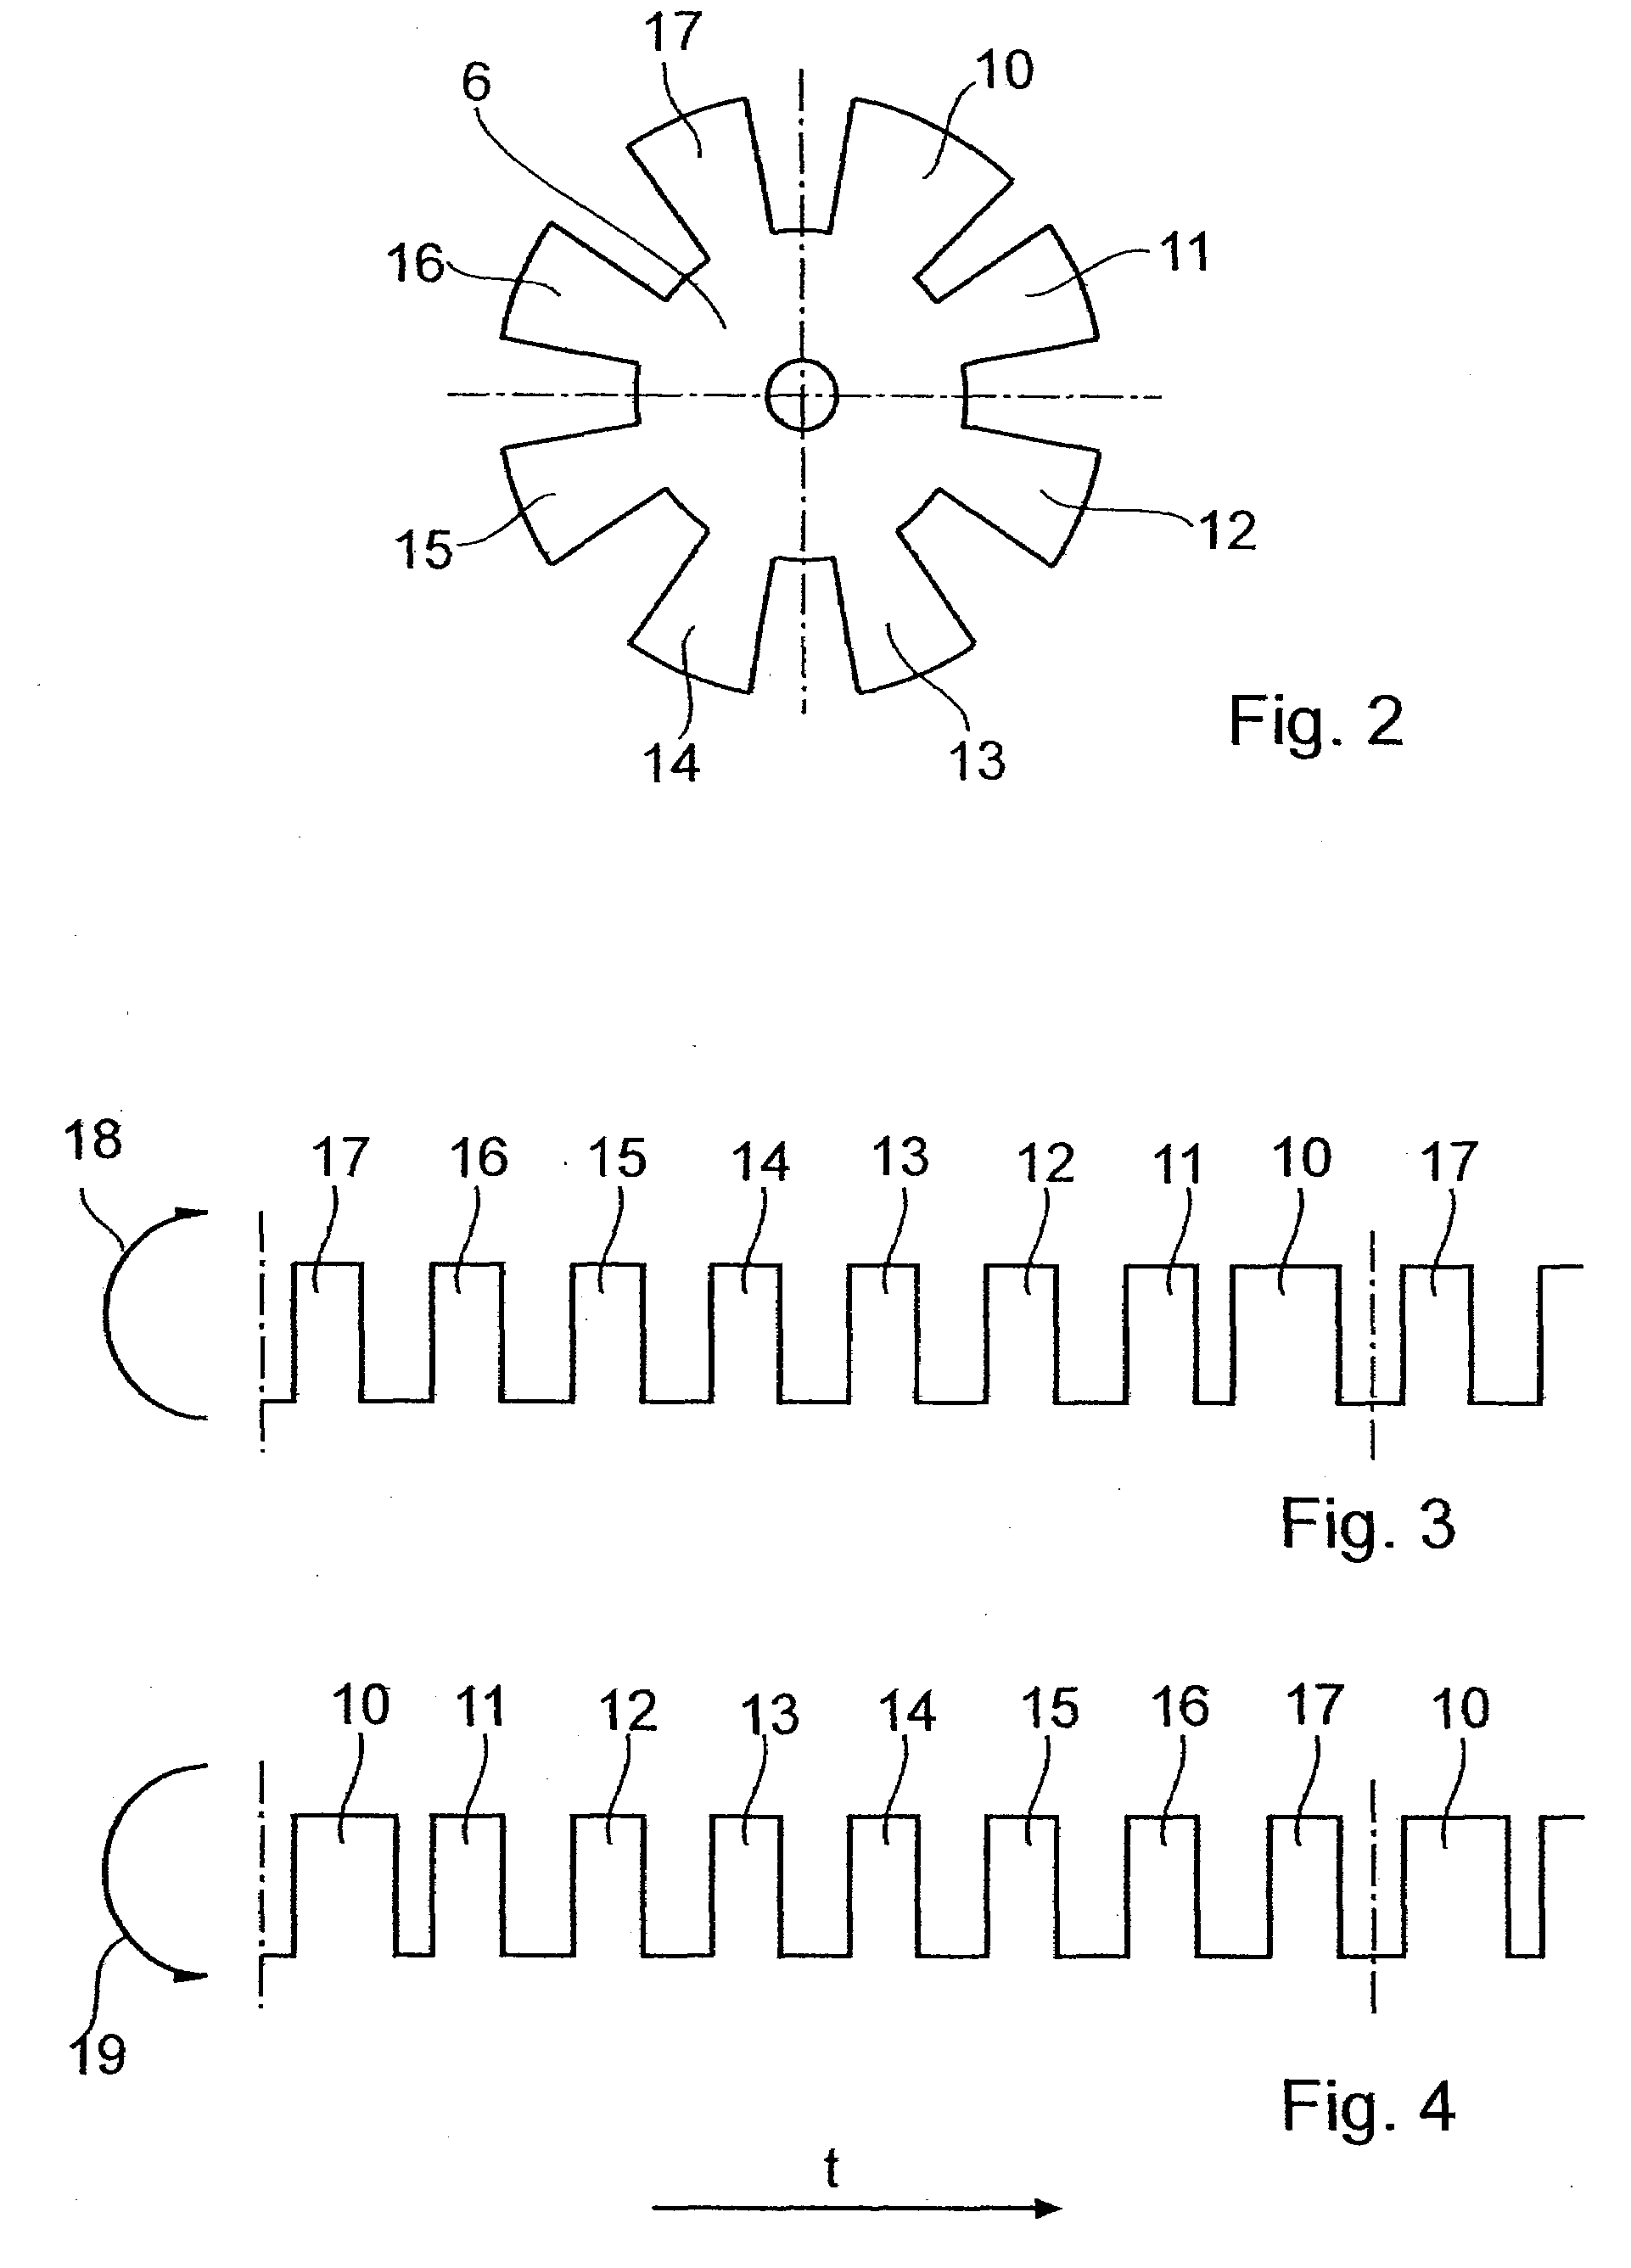 Drive Unit for a Door or Gate, Particularly for a Garage Door, and Method for Operating Such Drive Unit